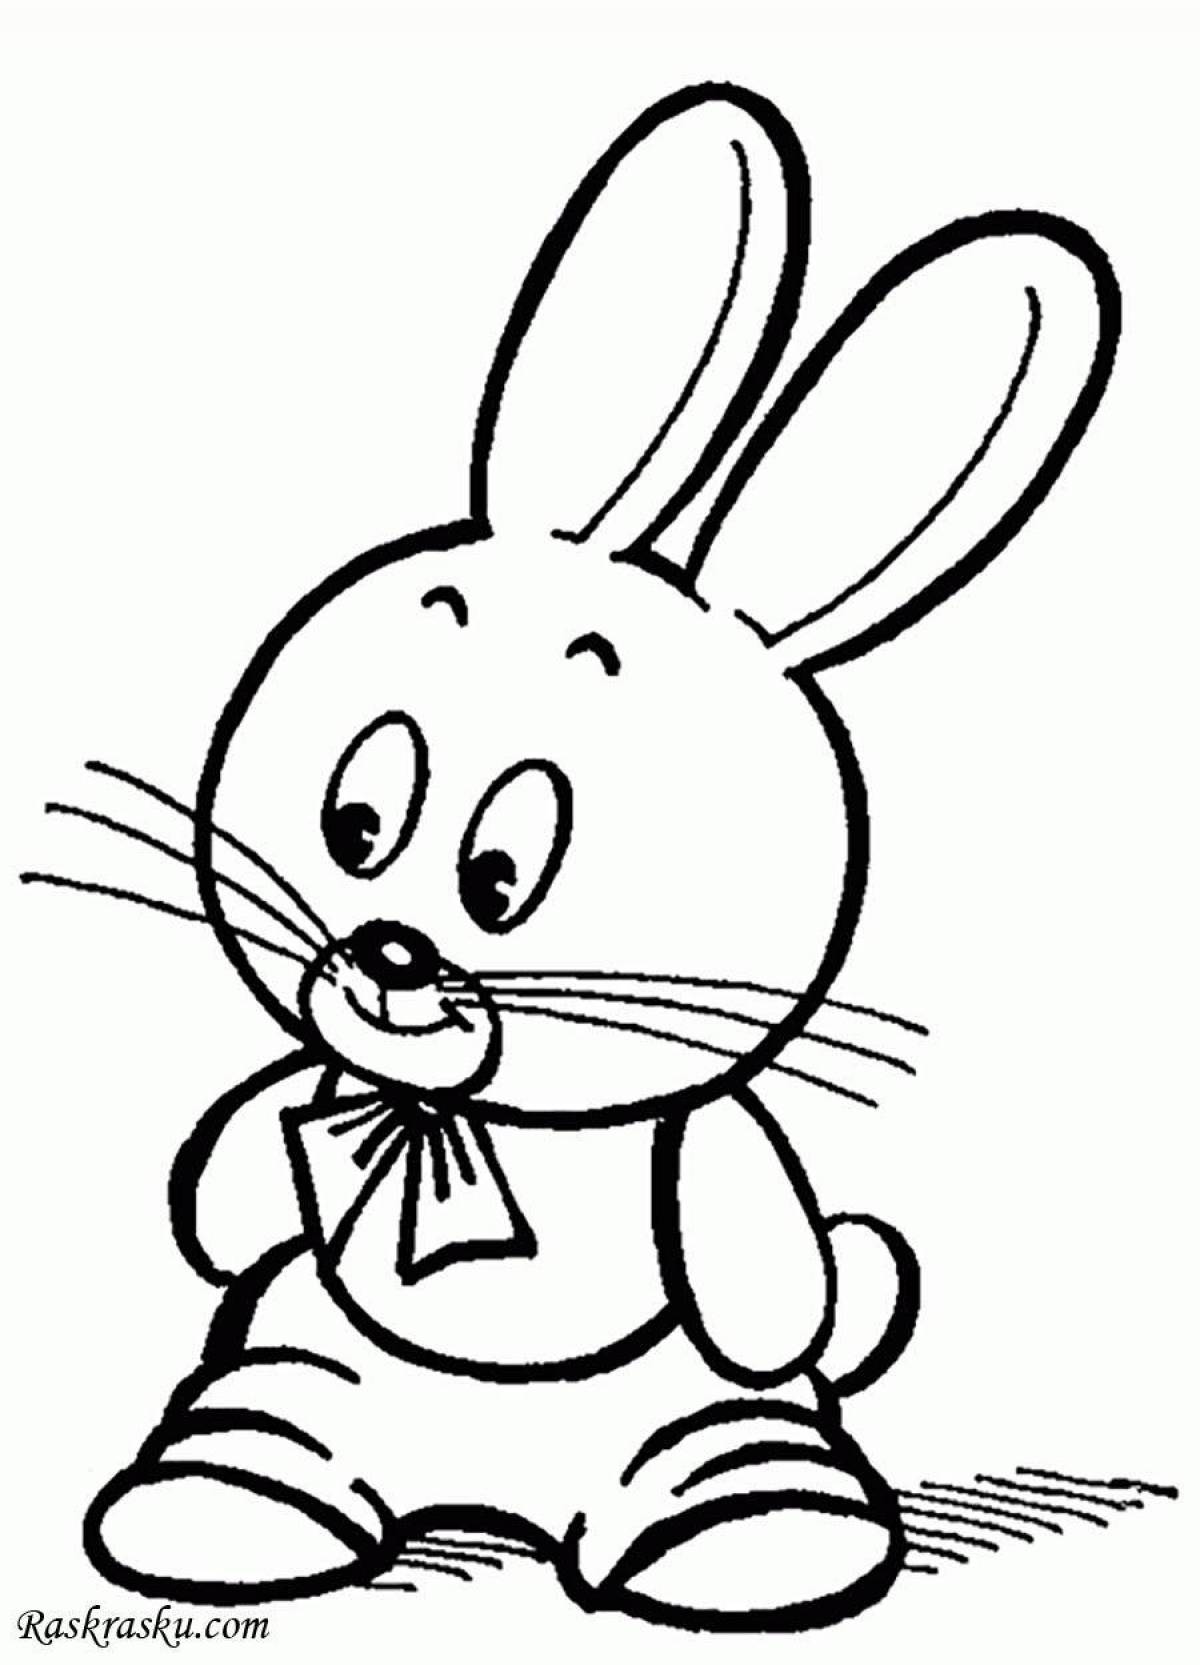 Inviting bunny coloring pages for kids